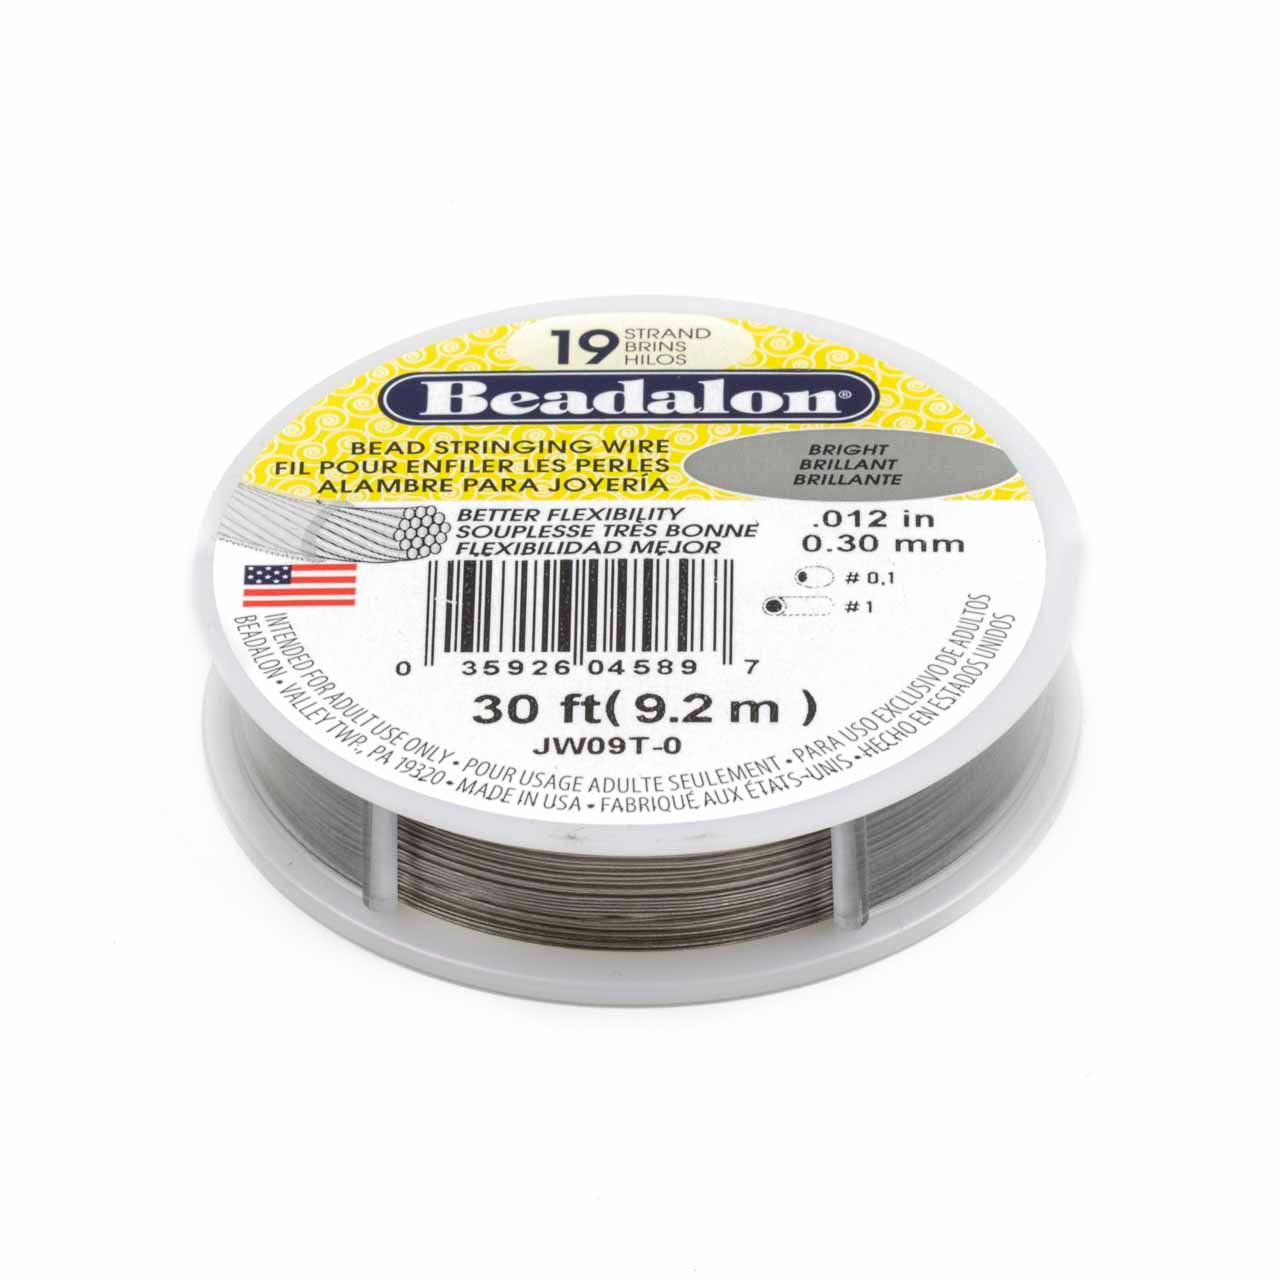 Beadalon 7 Strand Stainless Steel Bead Stringing Wire, 018 in / 0.46 mm,  Bright, 100 ft / 31 m